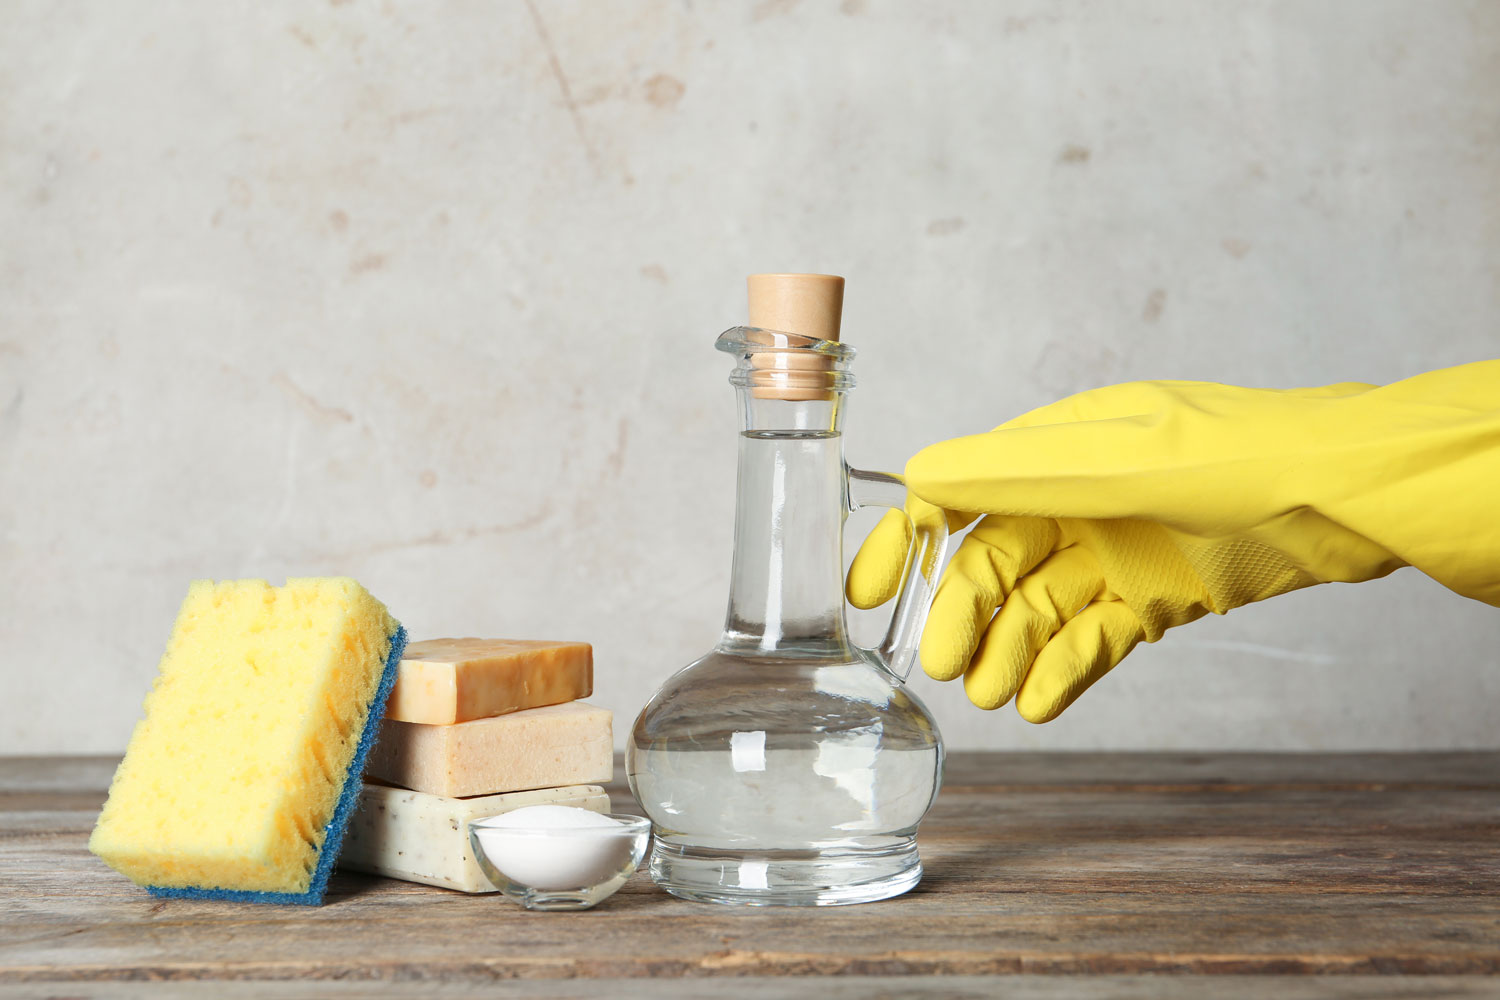 Mold Removal with Vinegar and Bleach - A Recipe for Disaster!